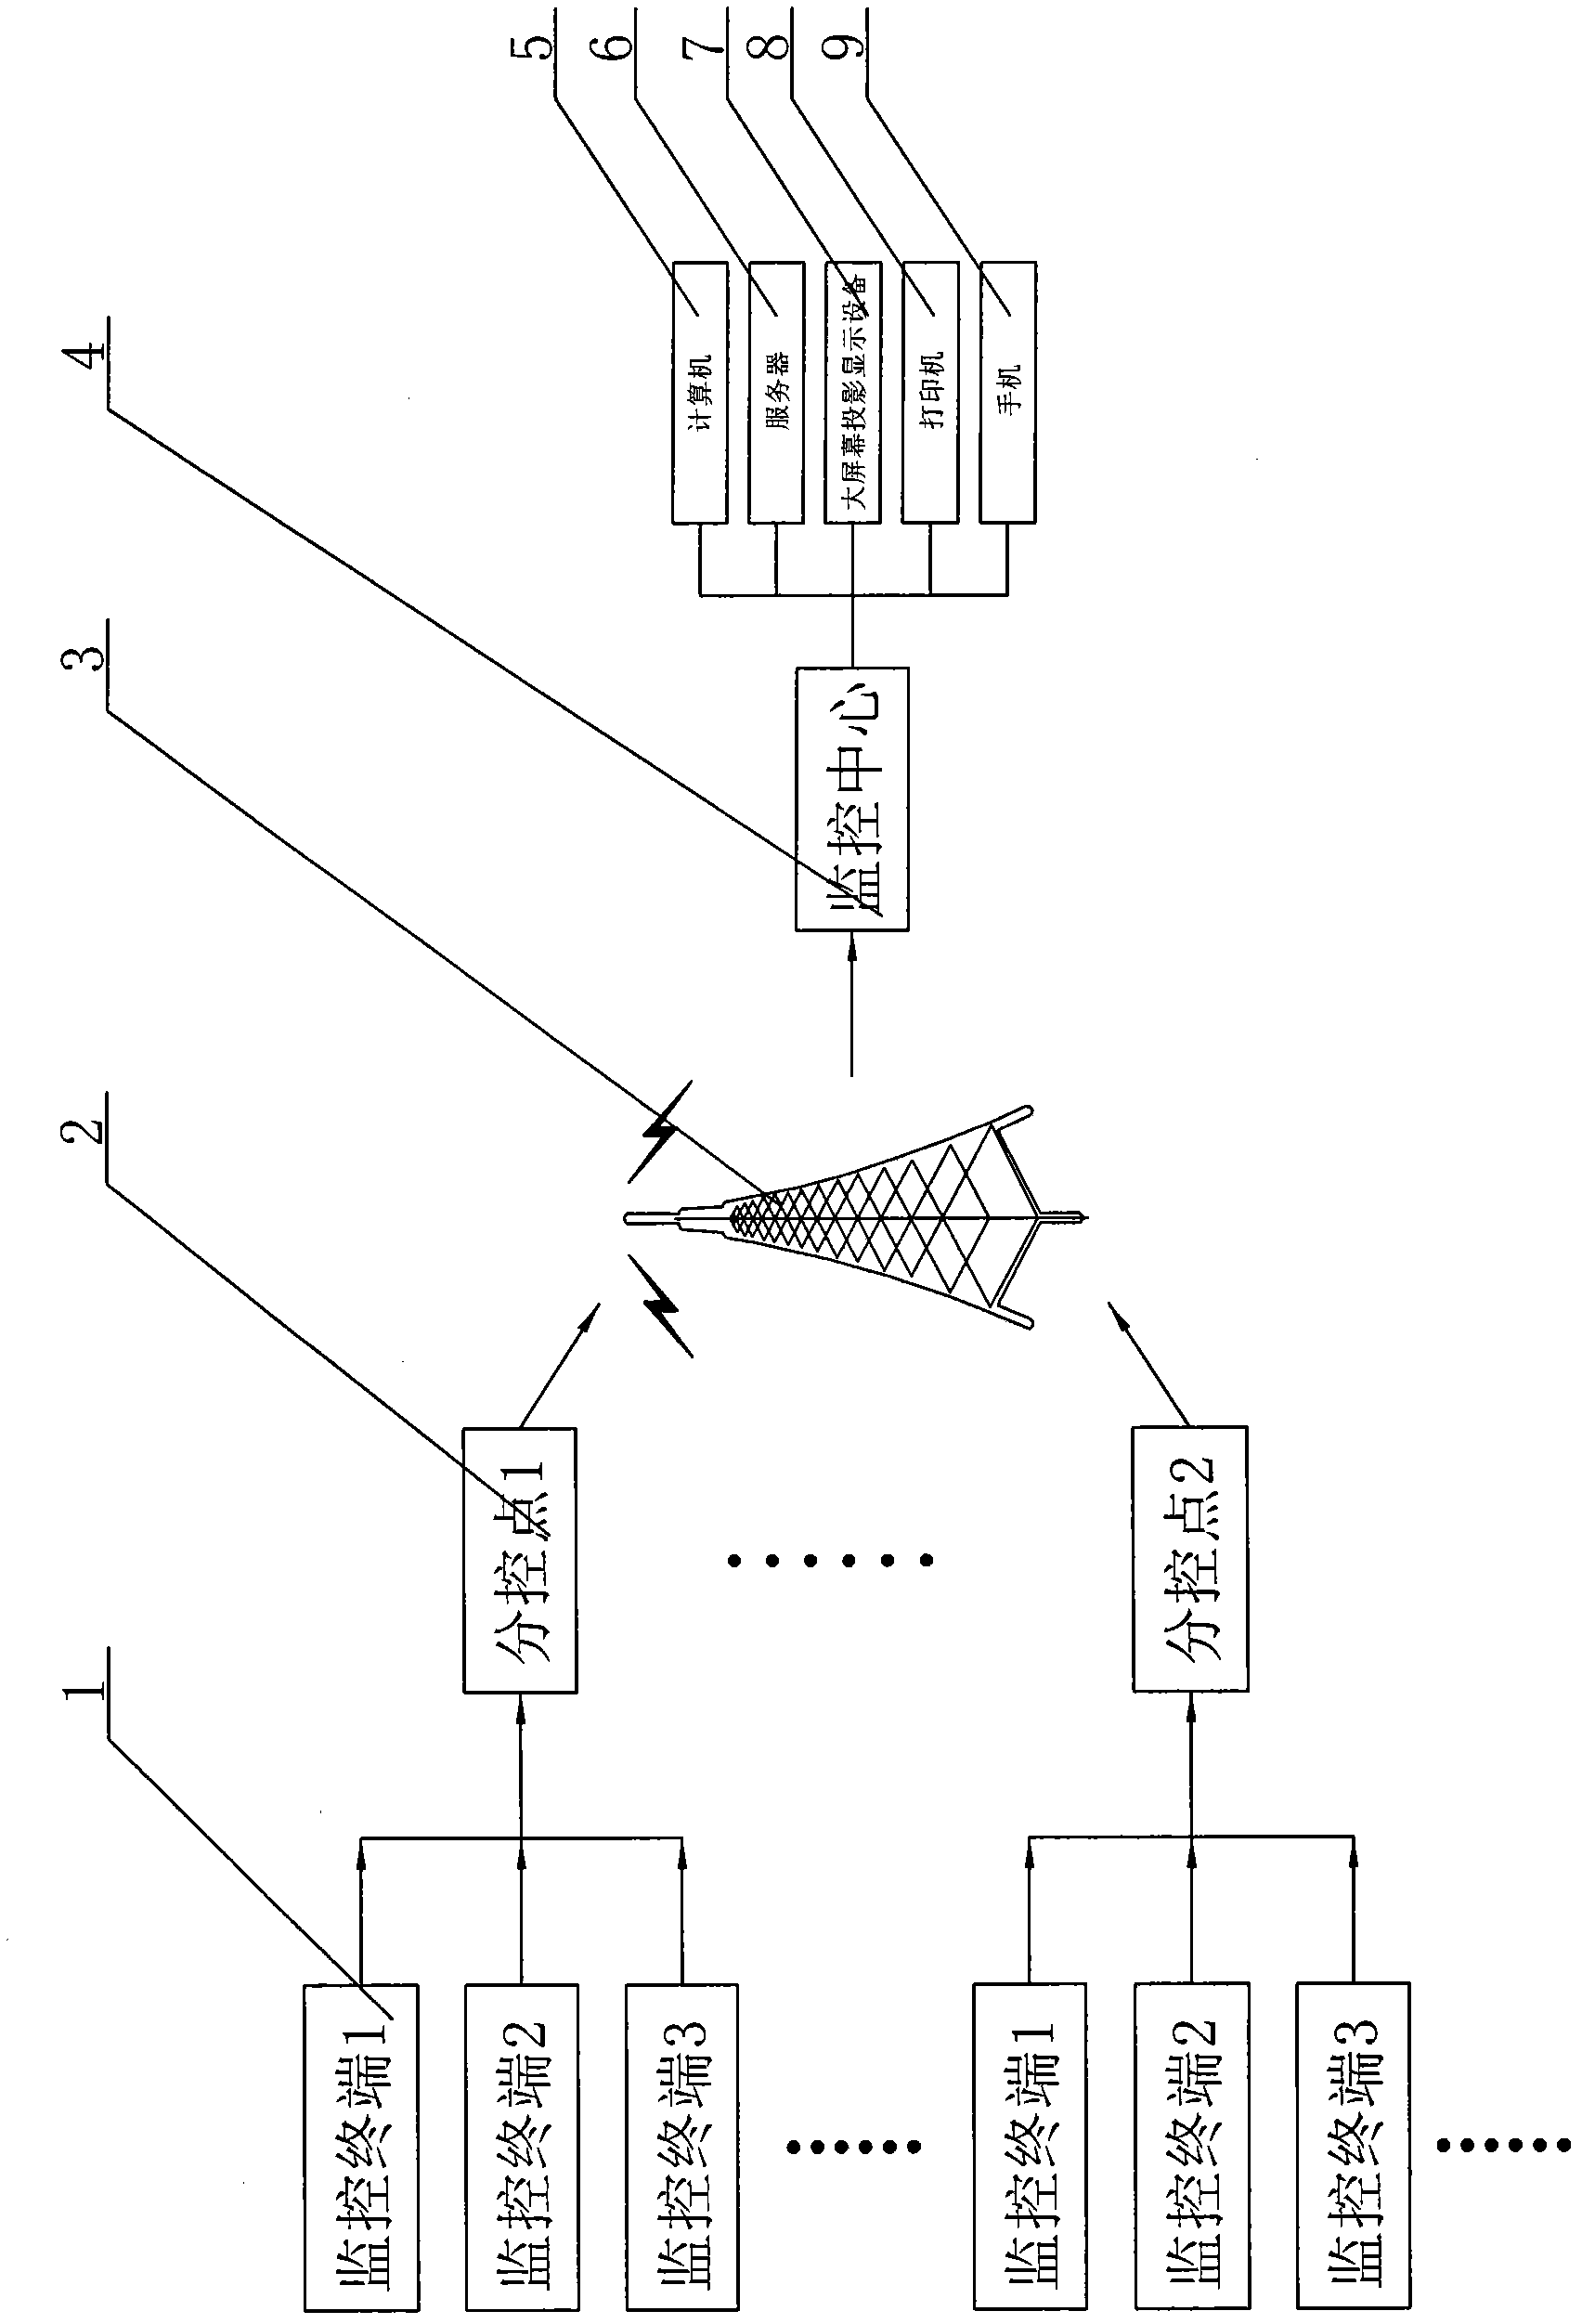 System for remotely monitoring and controlling internet of things on basis of GPRS (General Packet Radio Service) network